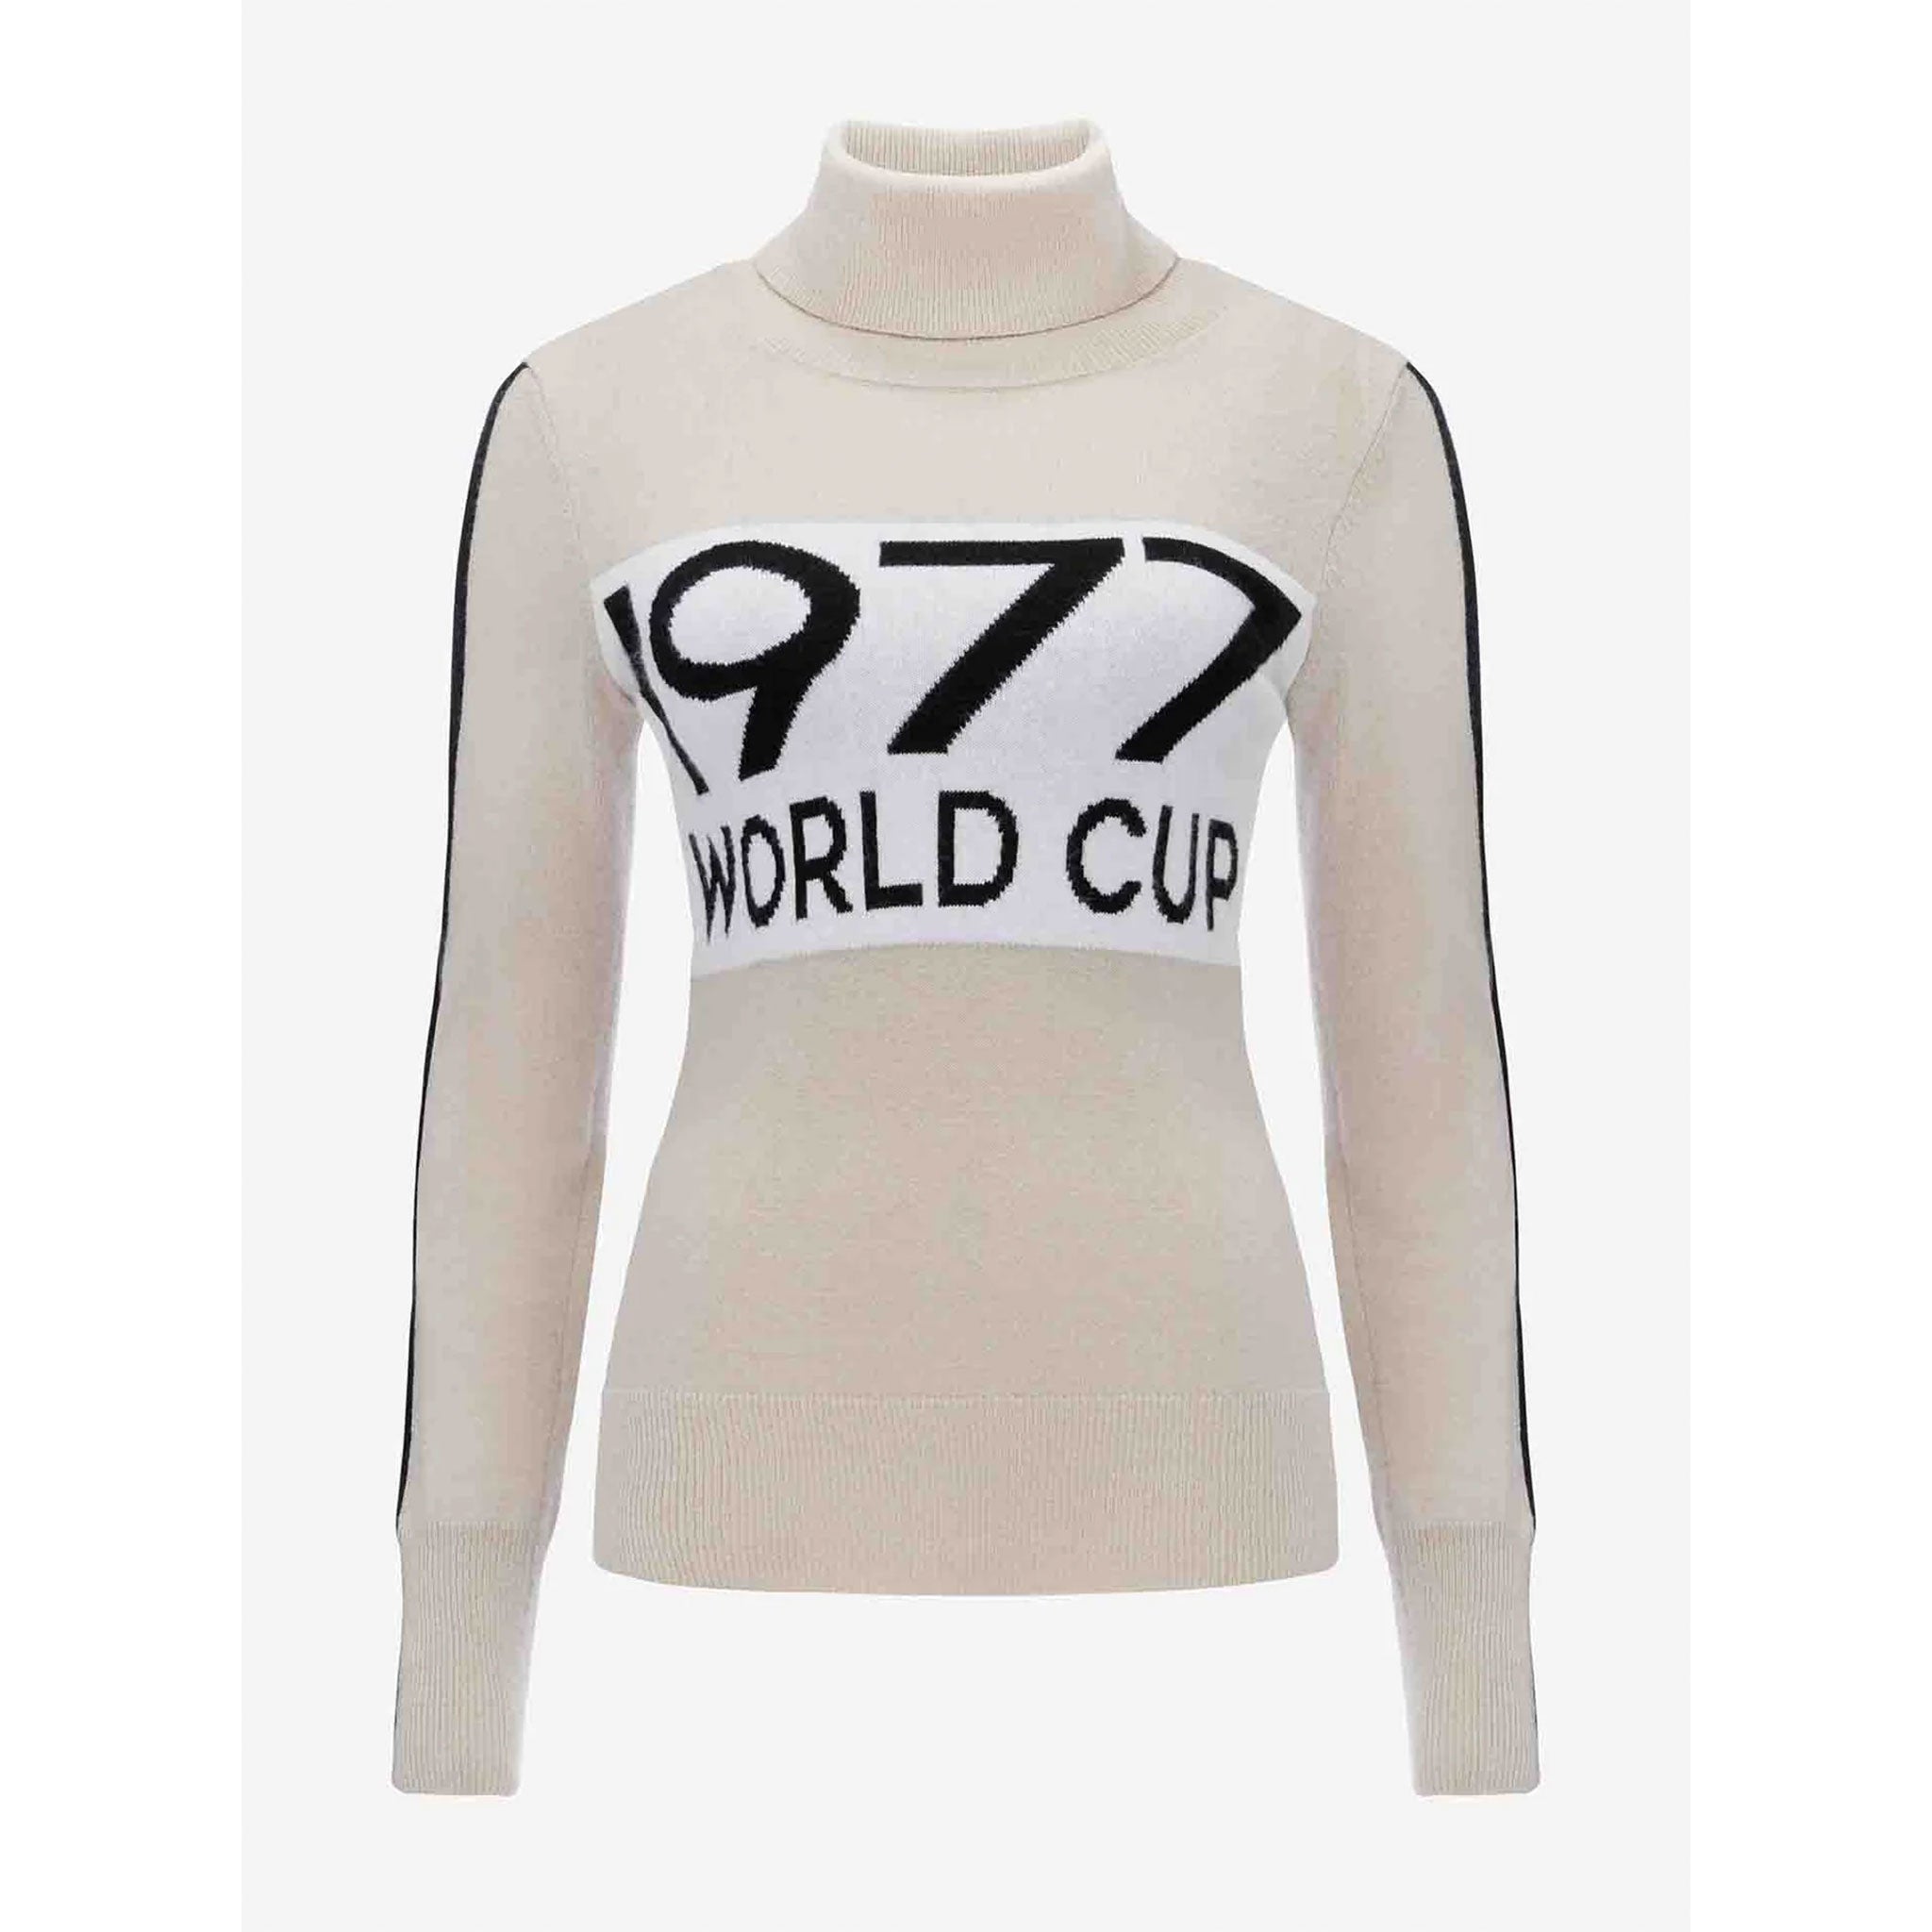 1977 World Cup Sweater in Sand